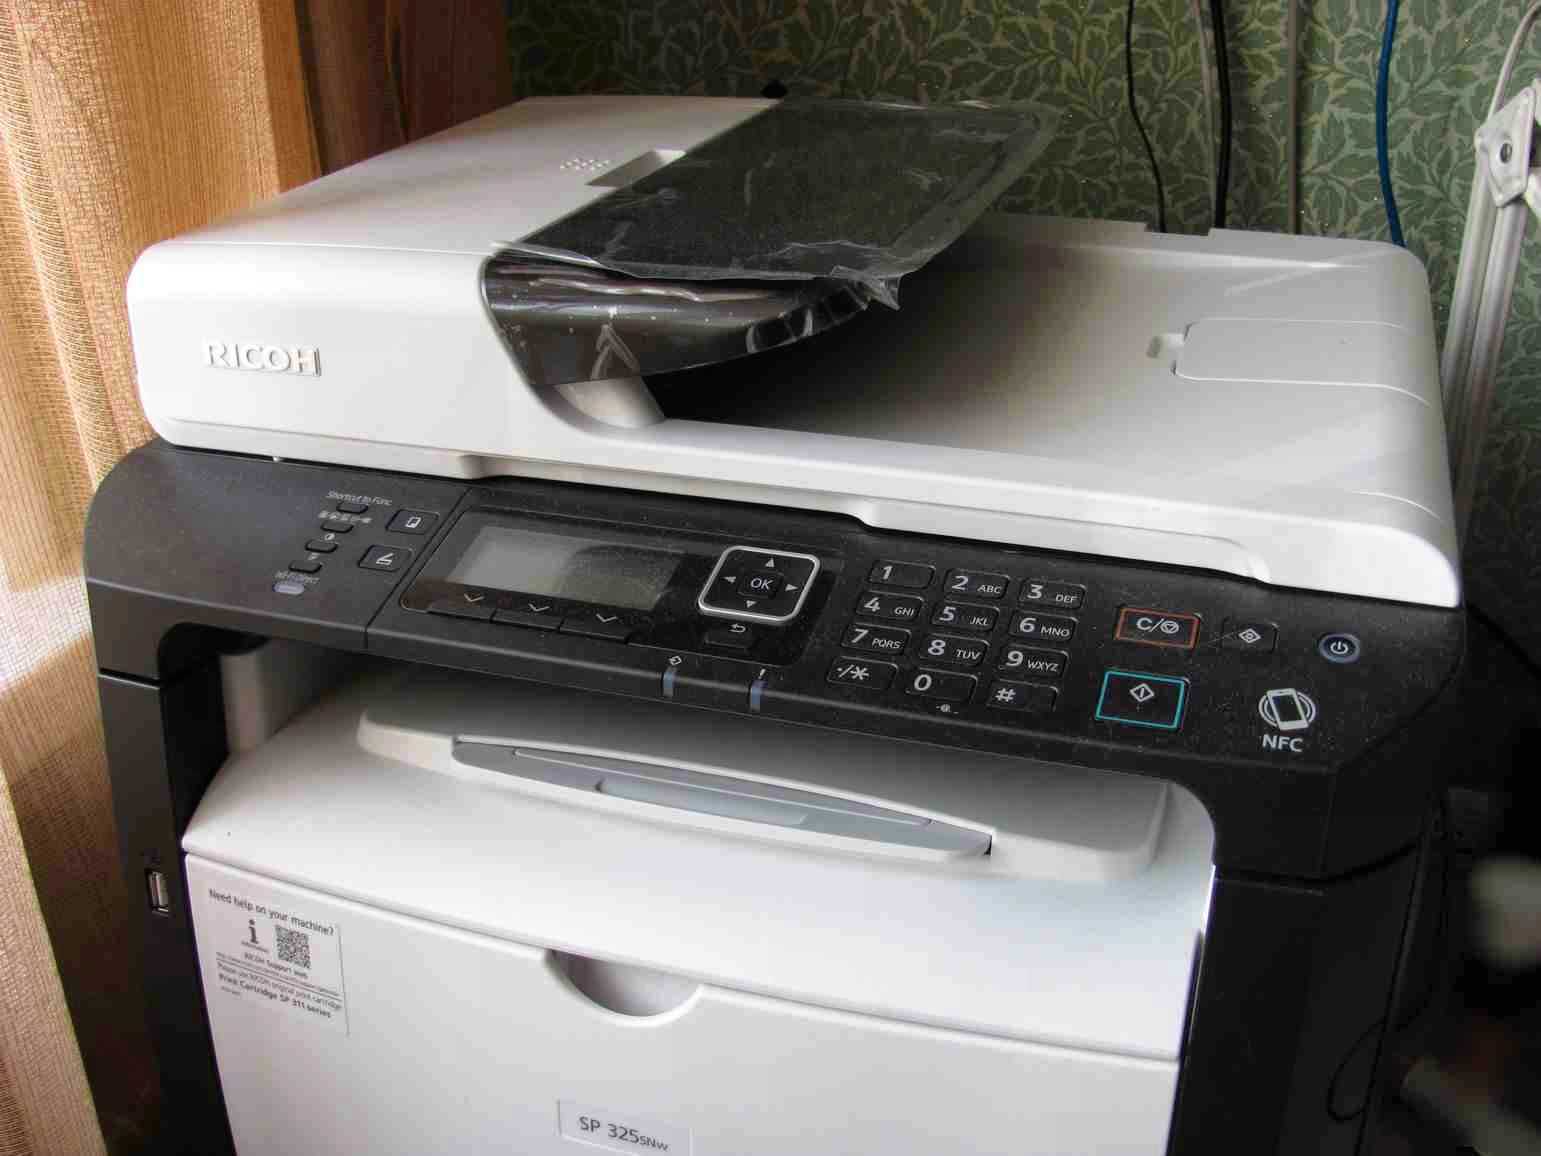 Ricoh sp 325snw. МФУ Рикон SP 325snw. Принтер Ricoh SP 325snw. МФУ Ricoh SP 325sfnw.